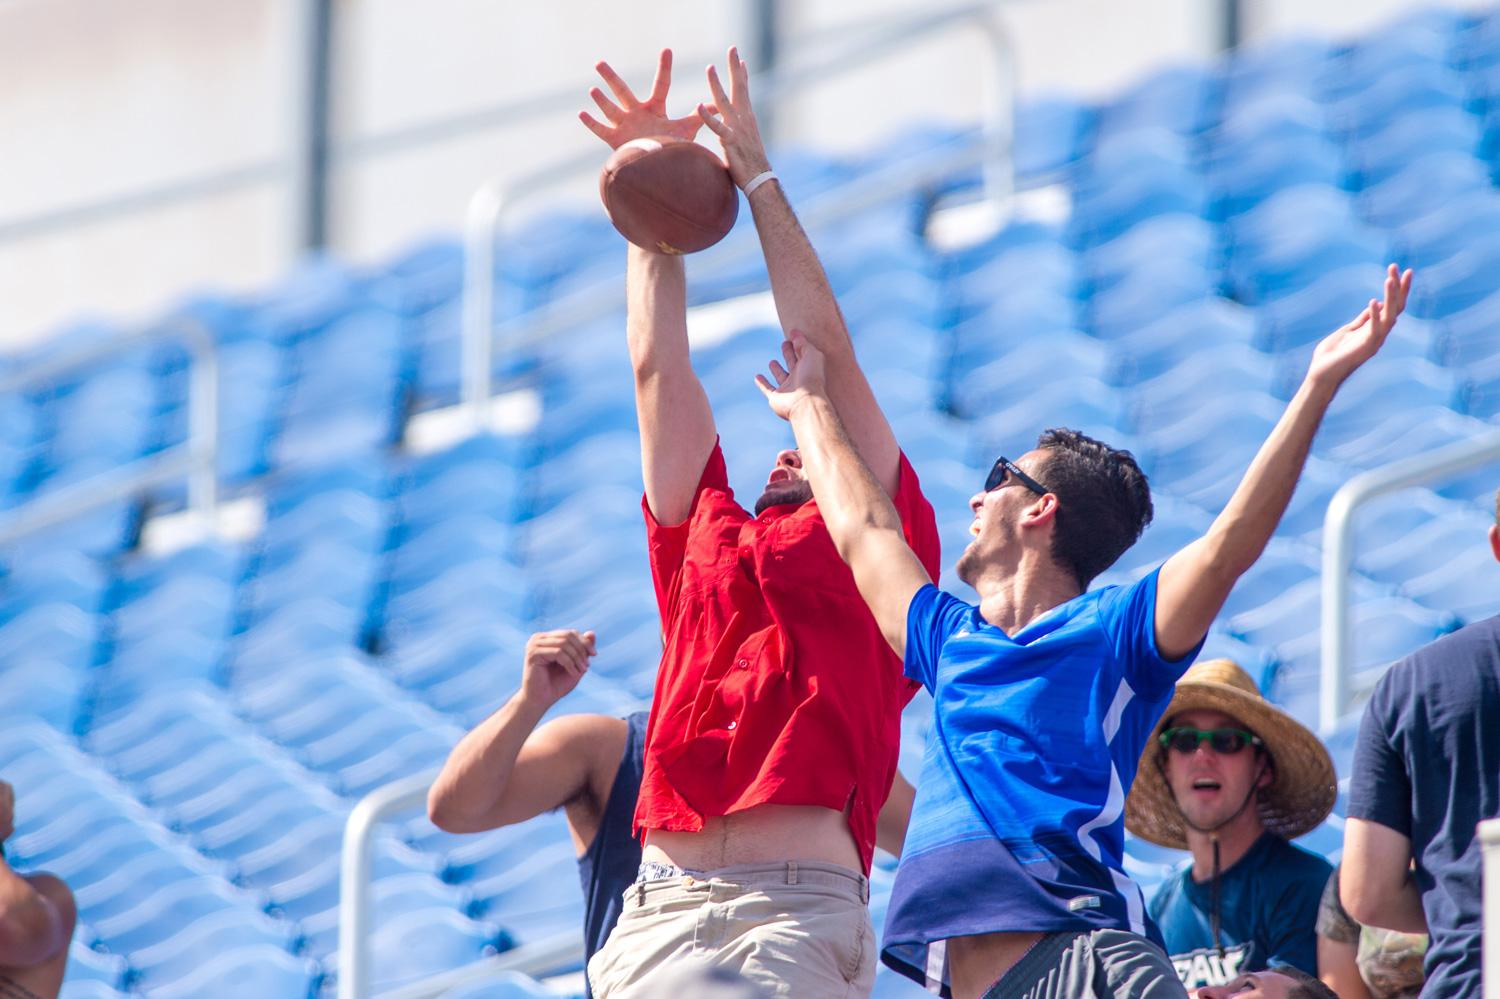 Students attempt to catch a ball that went through the upright earlier this season. Max Jackson | Staff Photographer